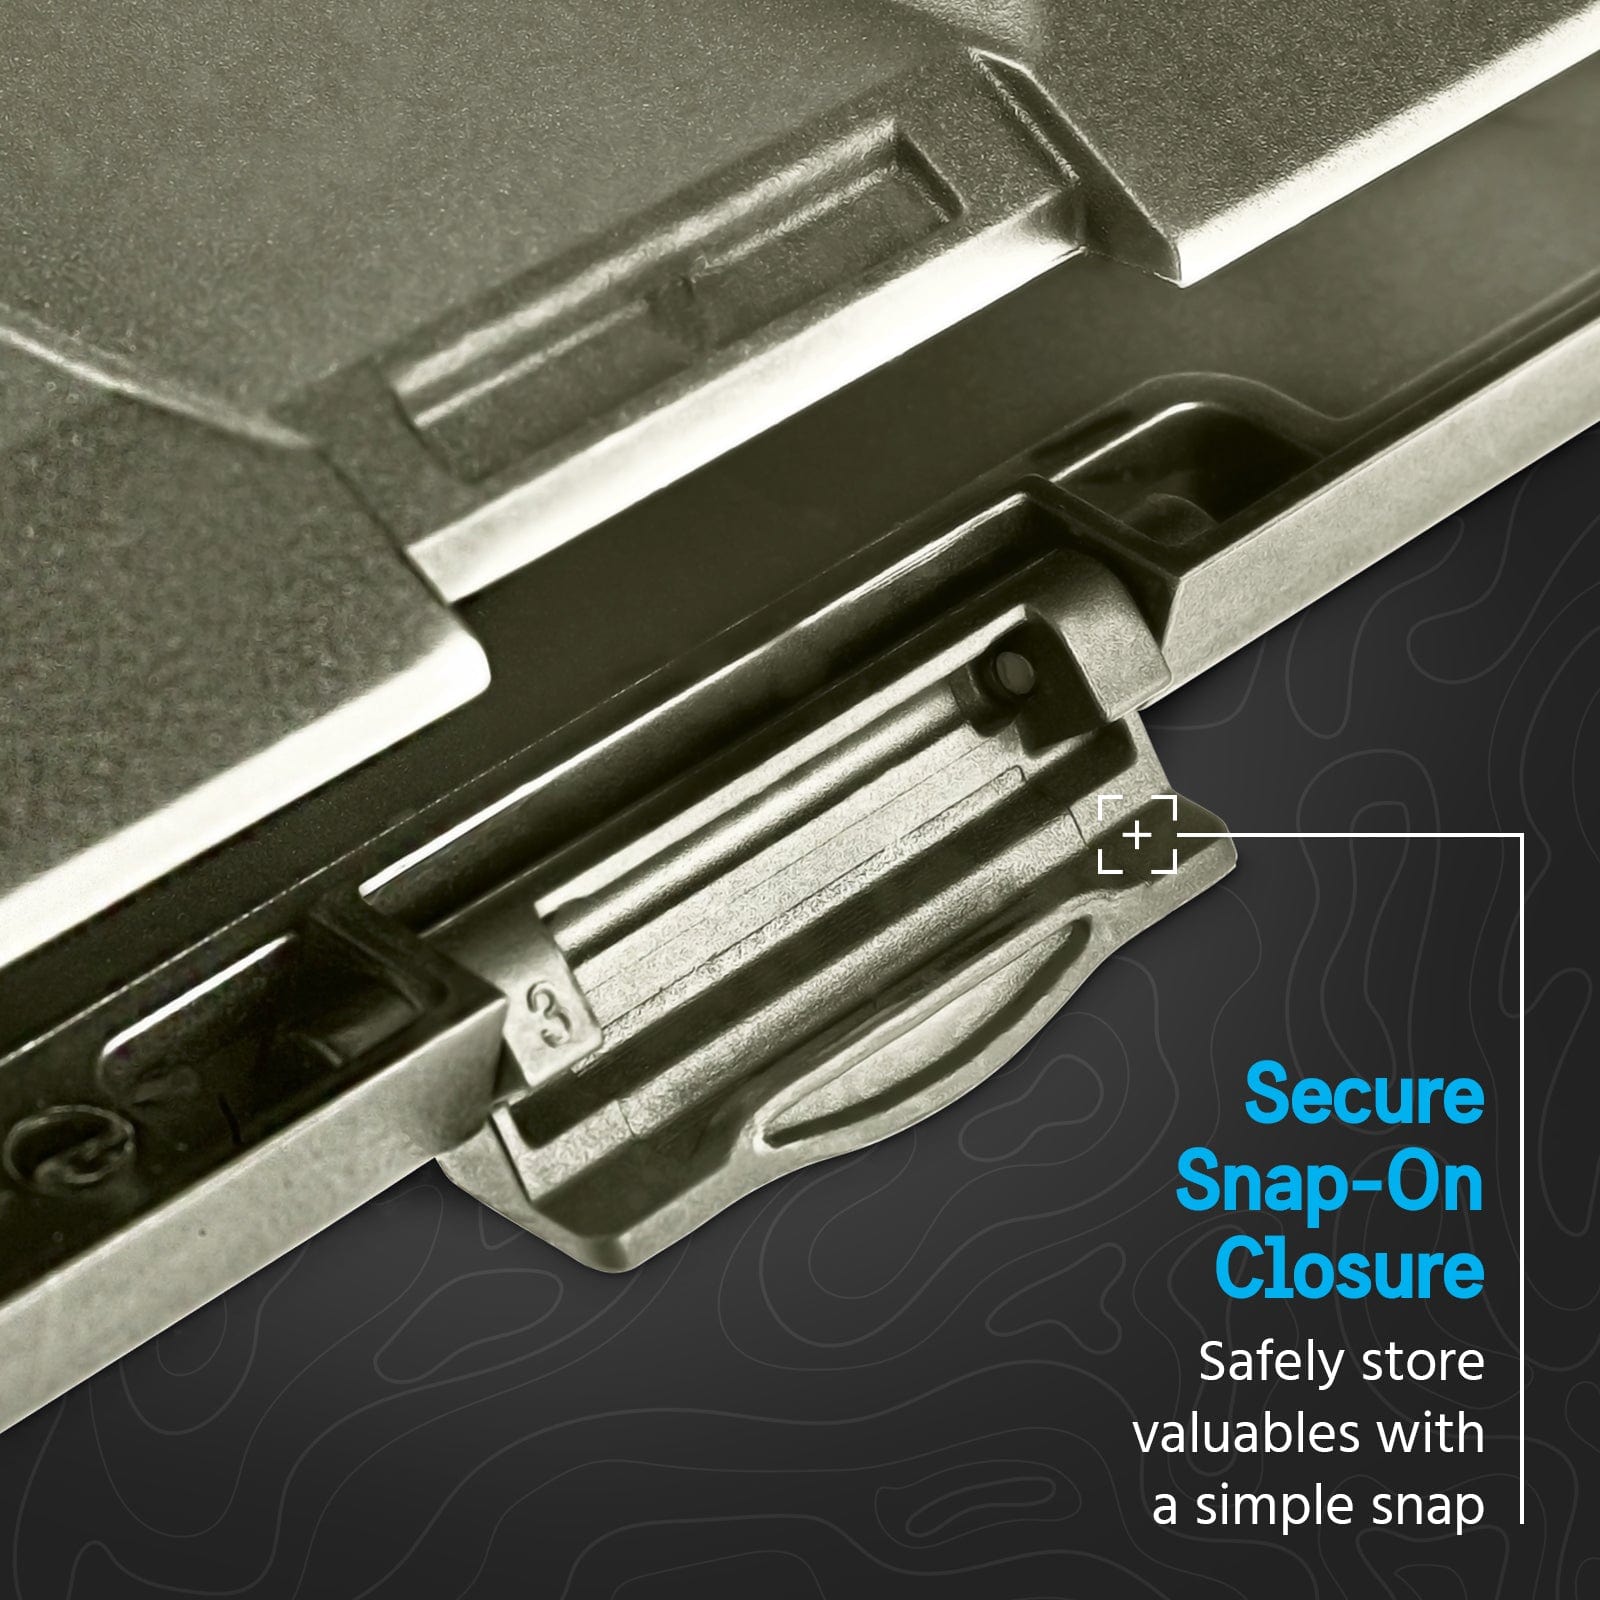 SECURE SNAP-ON CLOSURE. SAFEULY STORE VALUABLES WITH A SIMPLE SNAP.